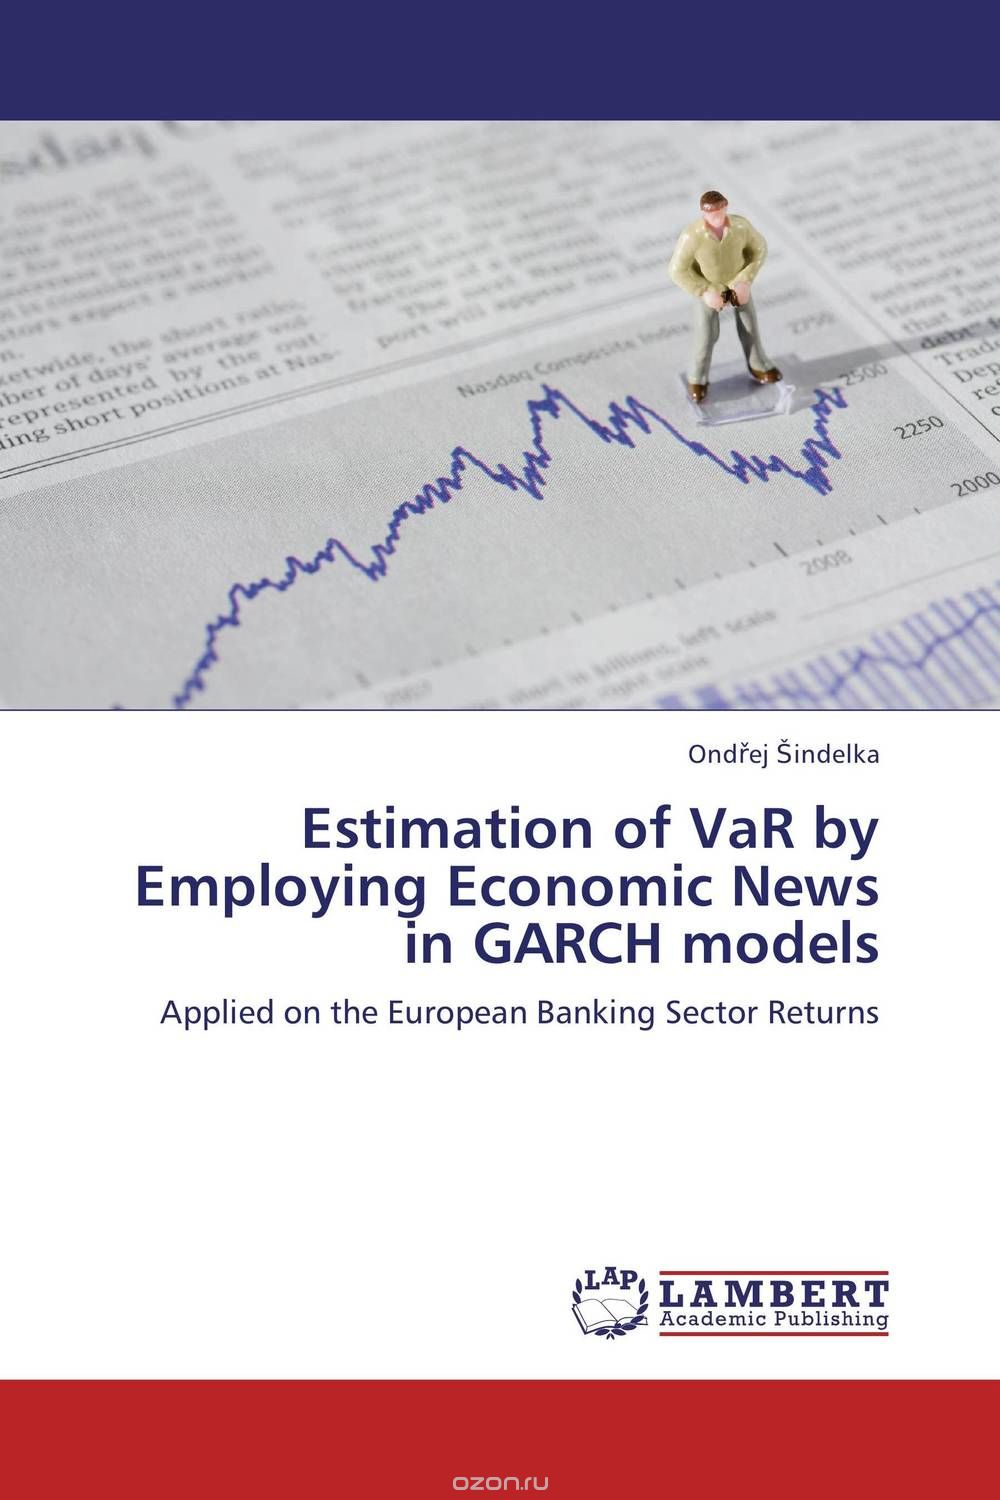 Estimation of VaR by Employing Economic News in GARCH models